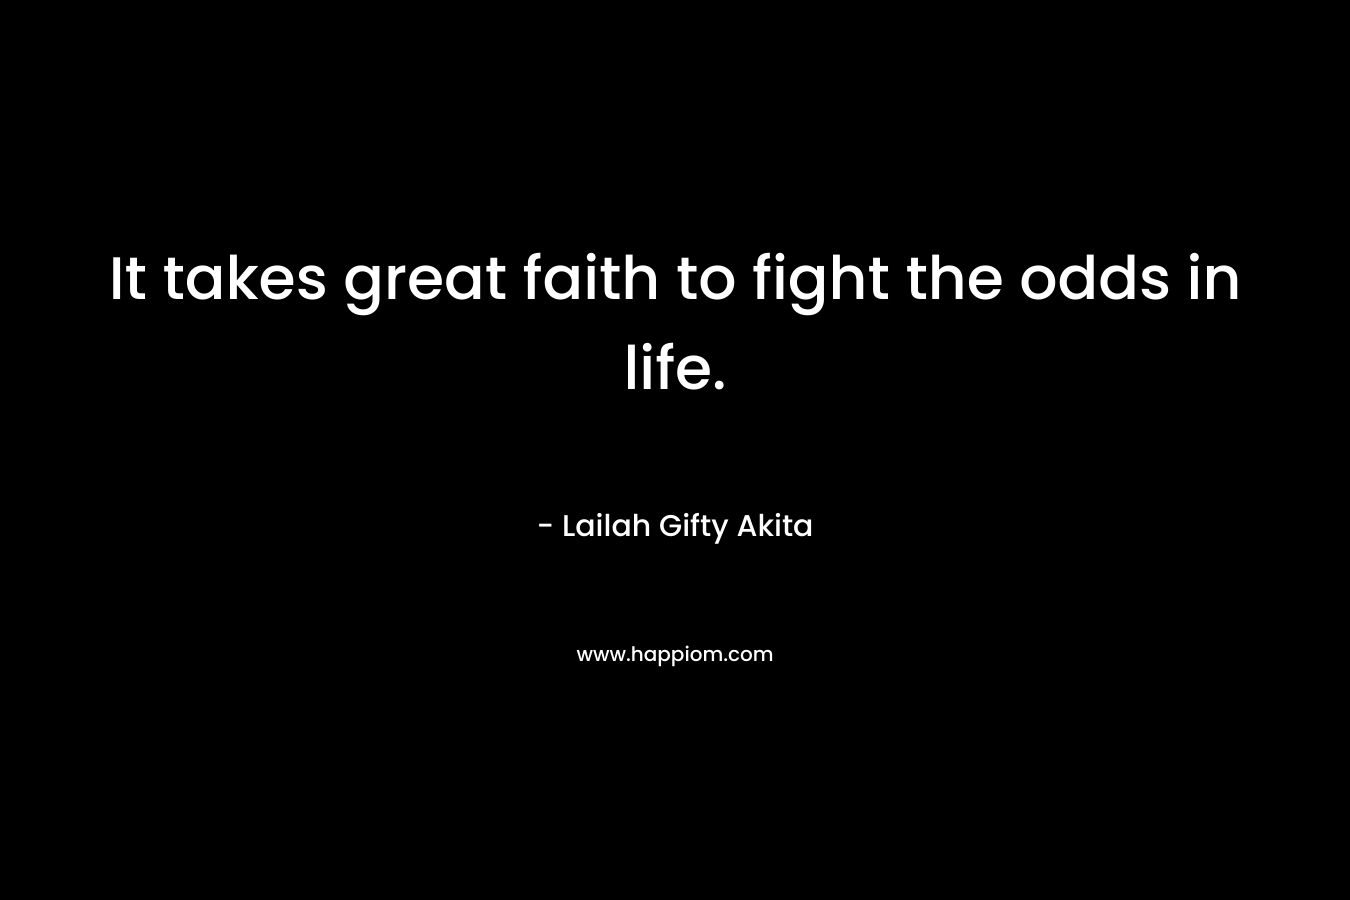 It takes great faith to fight the odds in life.